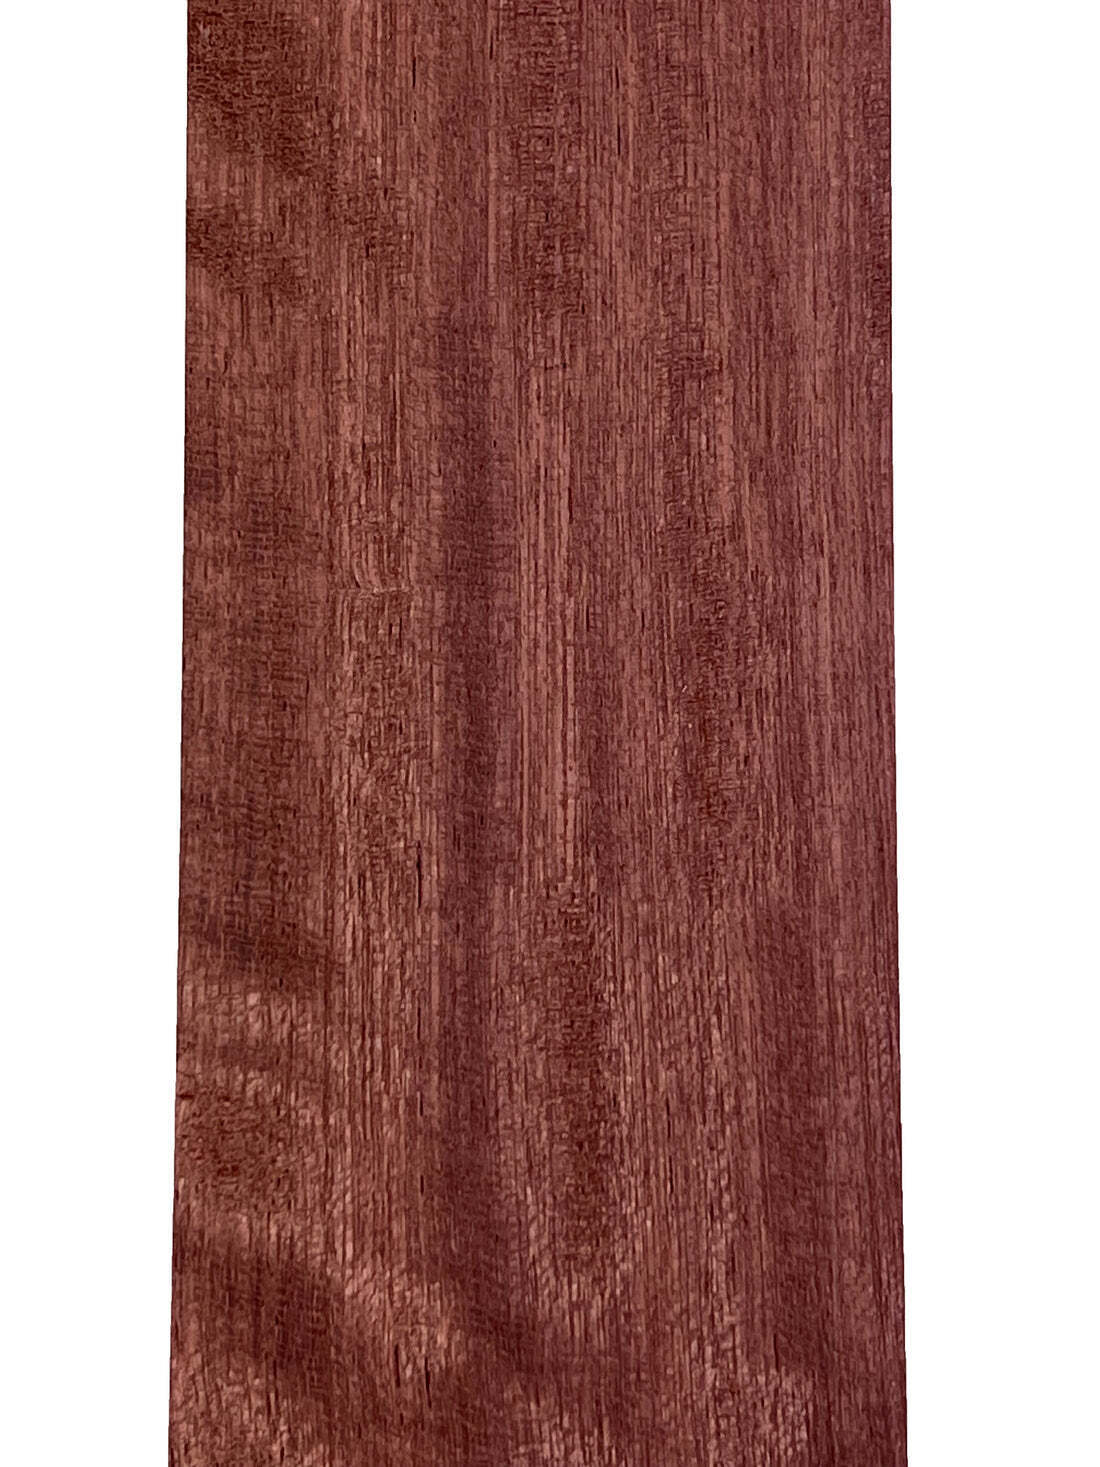 Pack of 3, Purpleheart Thin Dimensional Lumber Board Wood Blank 3/4" x 2" x 16" EXOTIC WOOD ZONE Does Not Apply - фотография #6